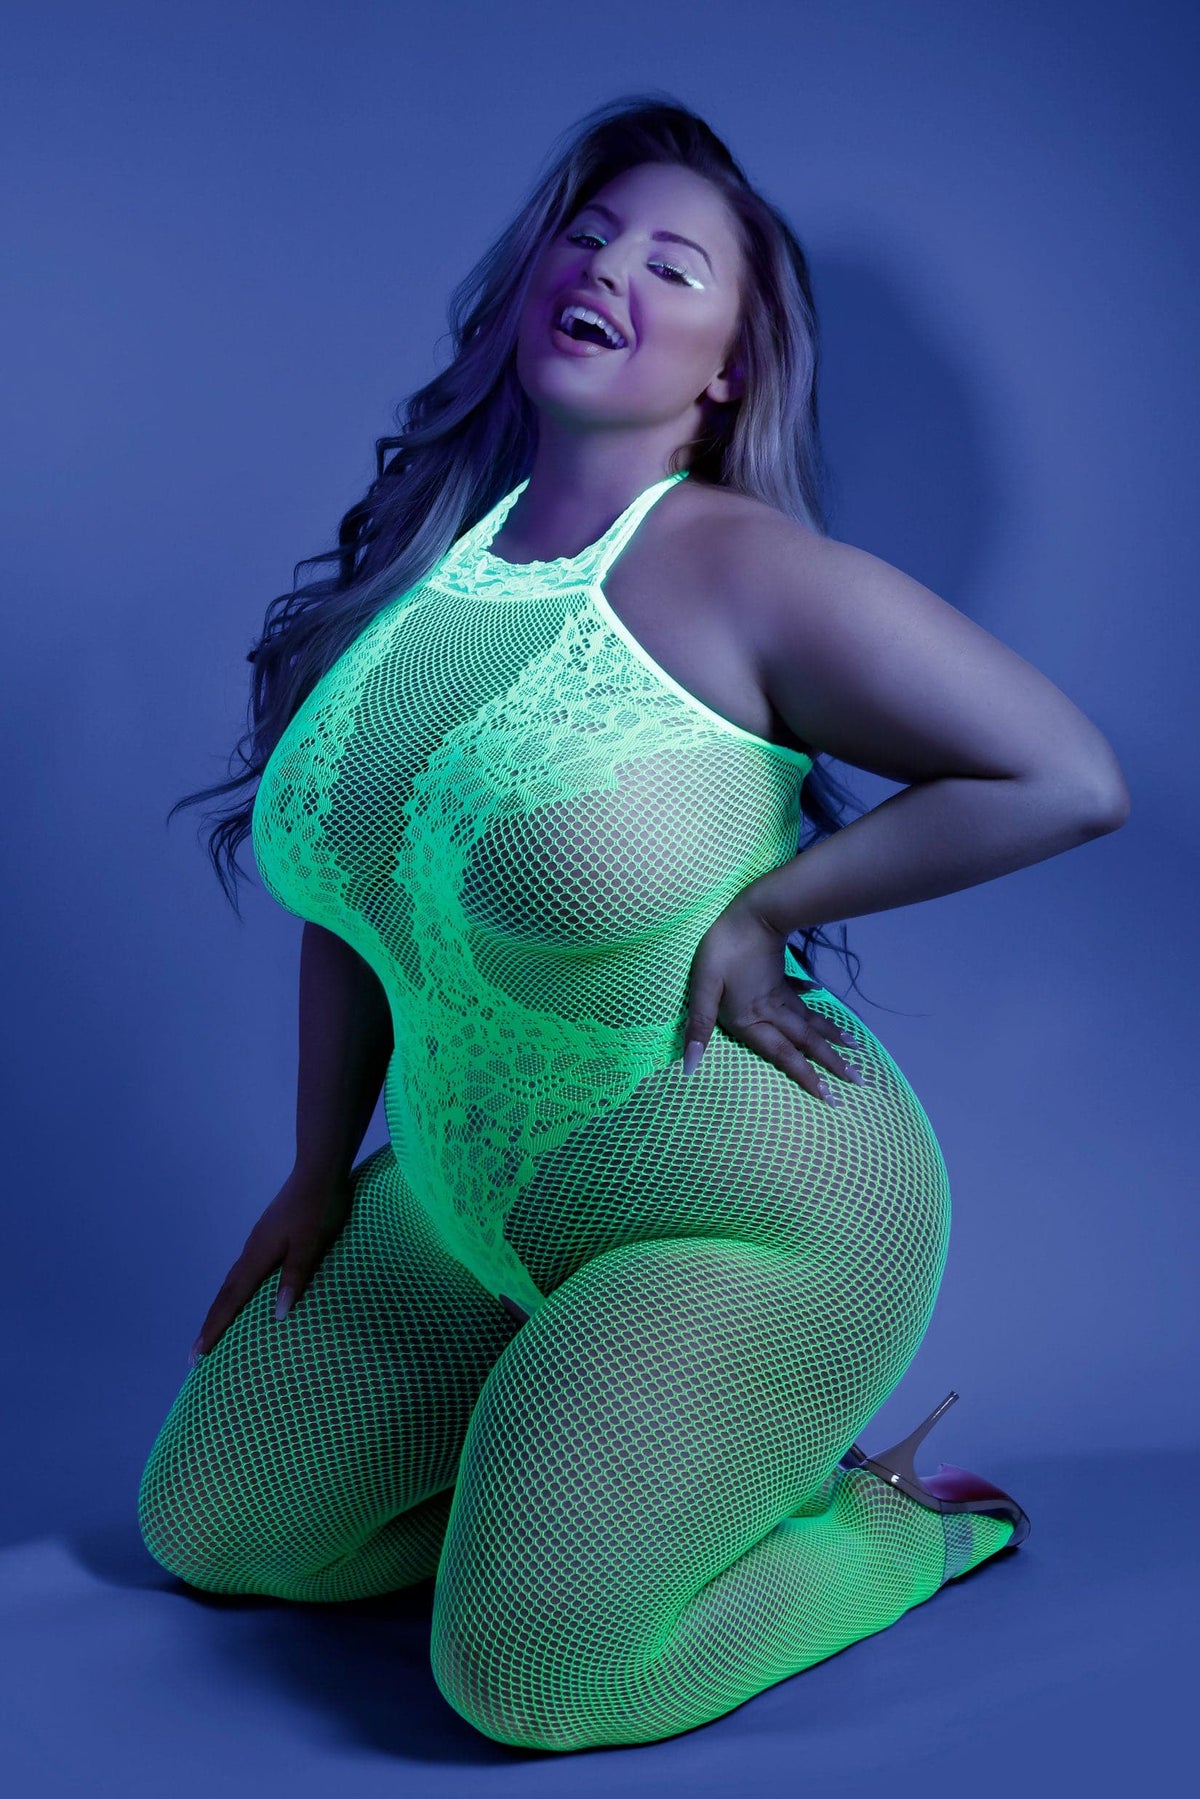 moonbeam crotchless bodystocking queen neon green